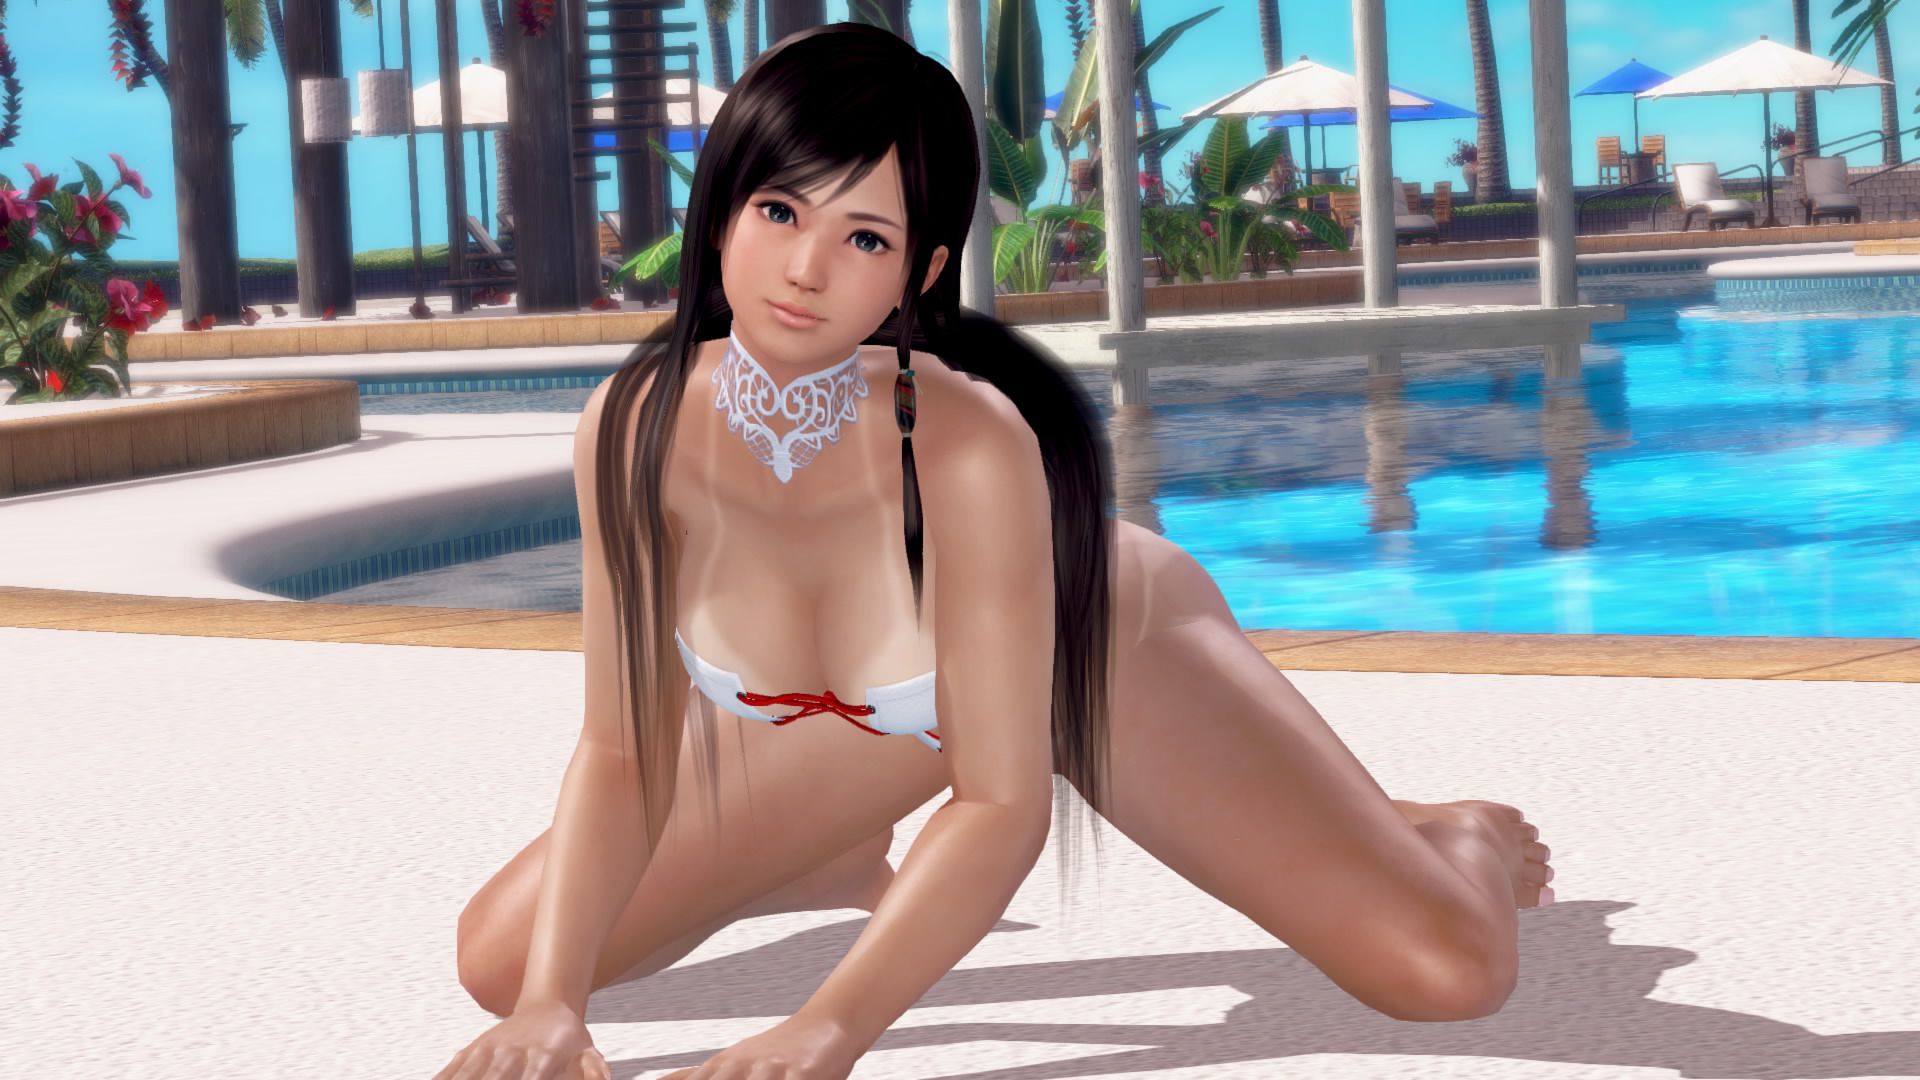 DOAX3 heart has a cute neat and clean system bitch 24